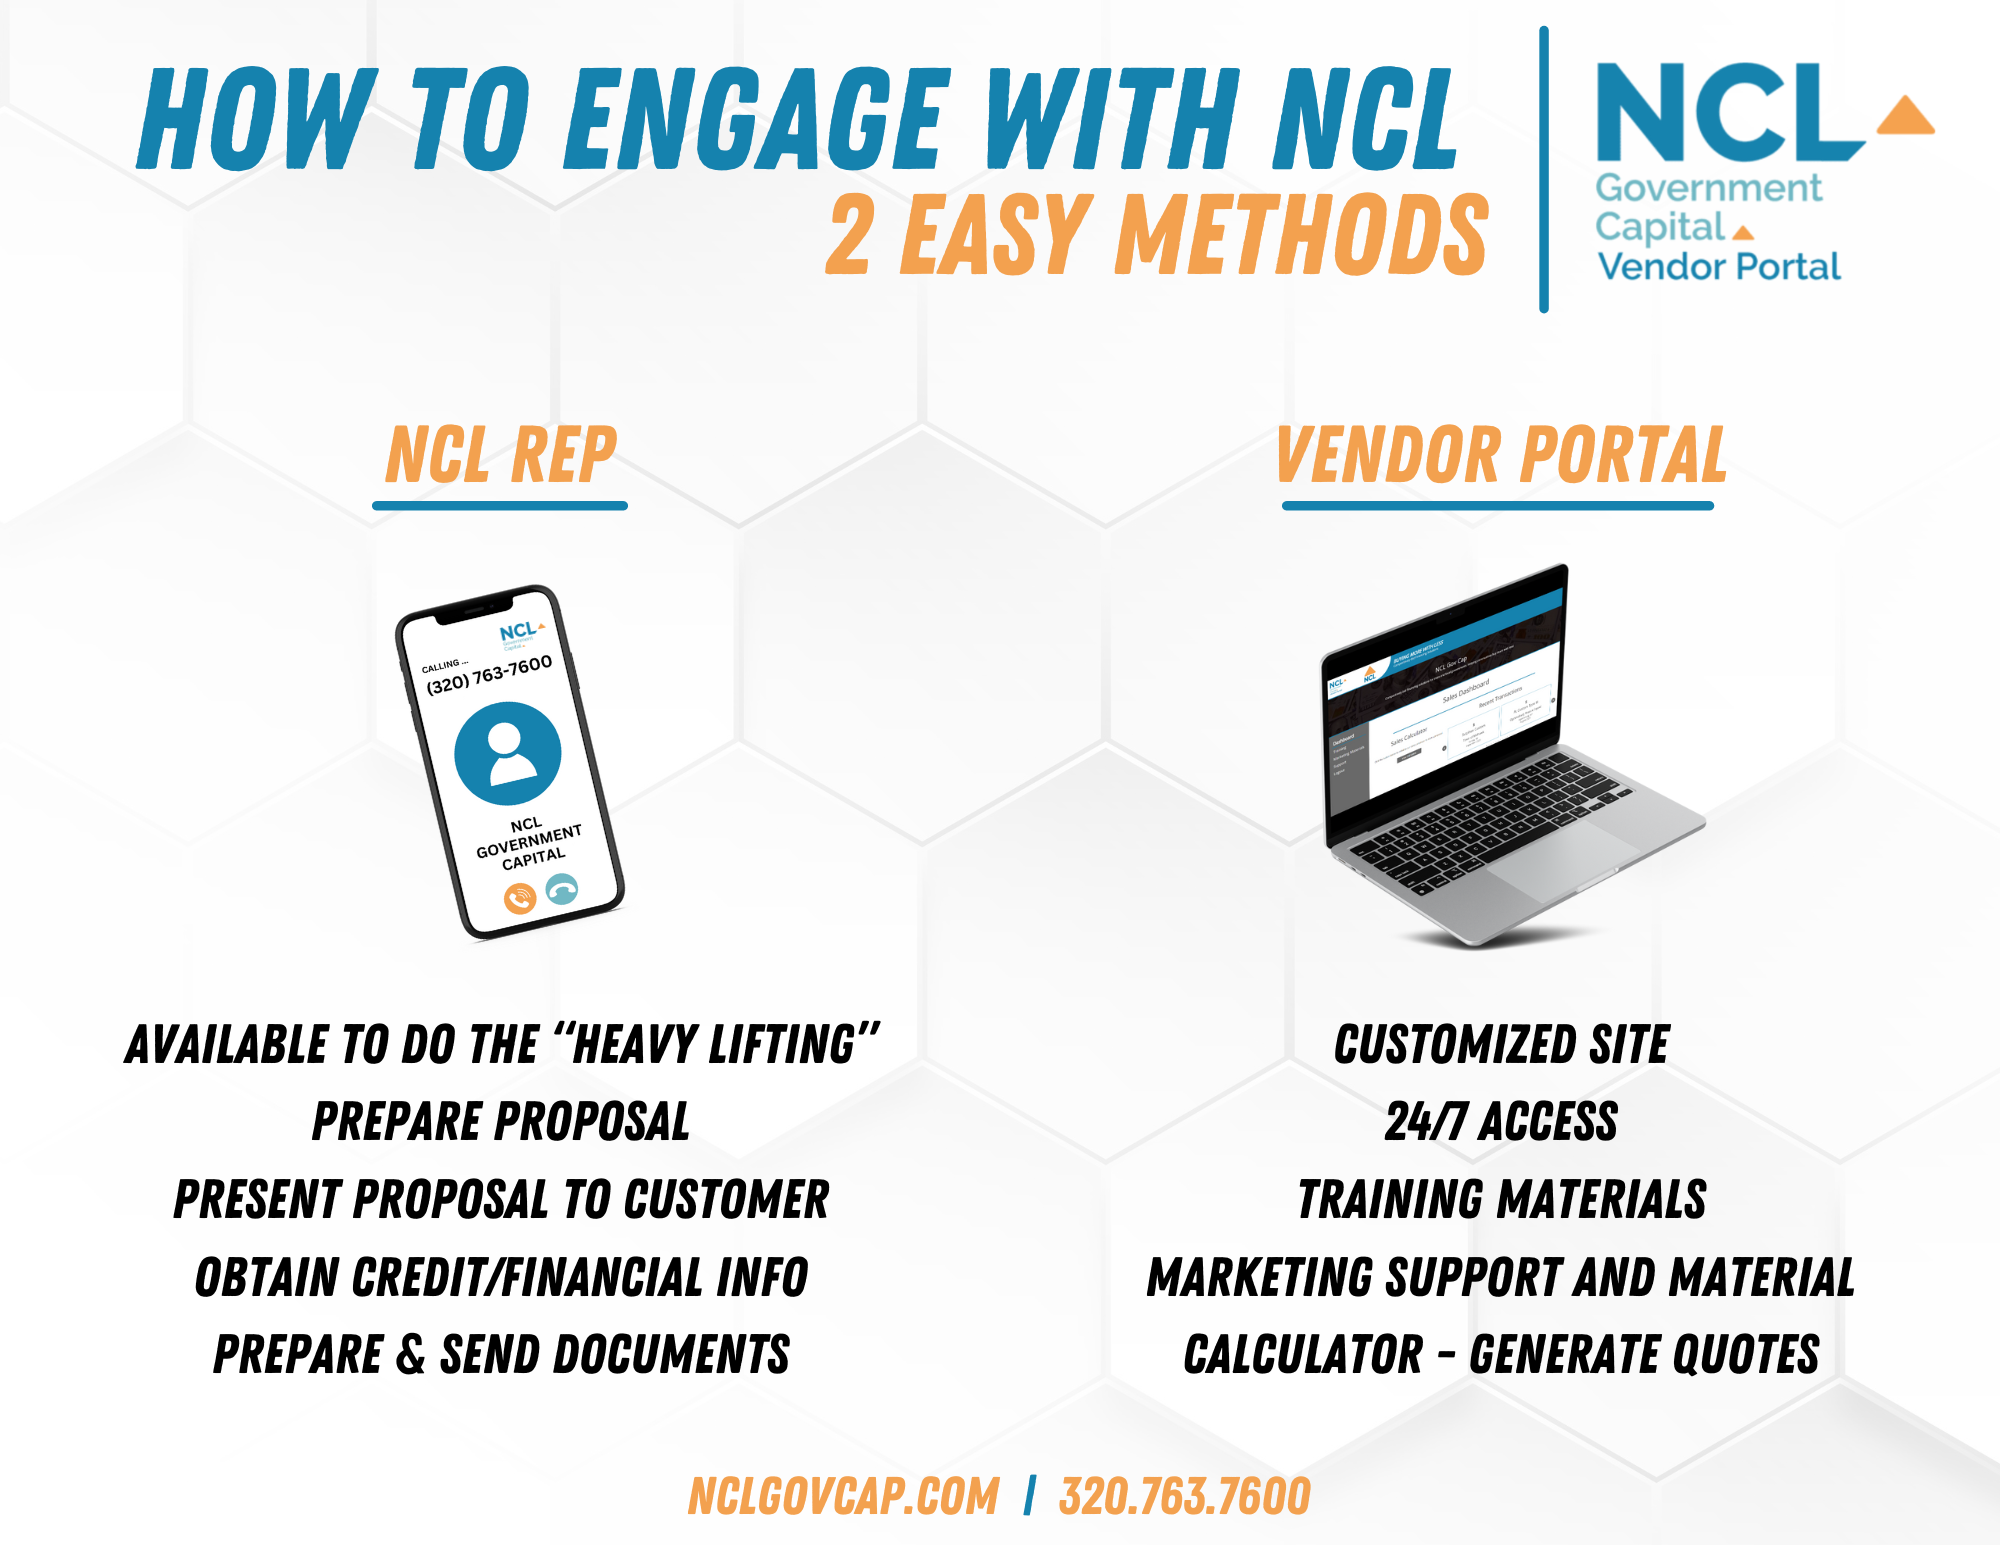 ENGAGE WITH NCL